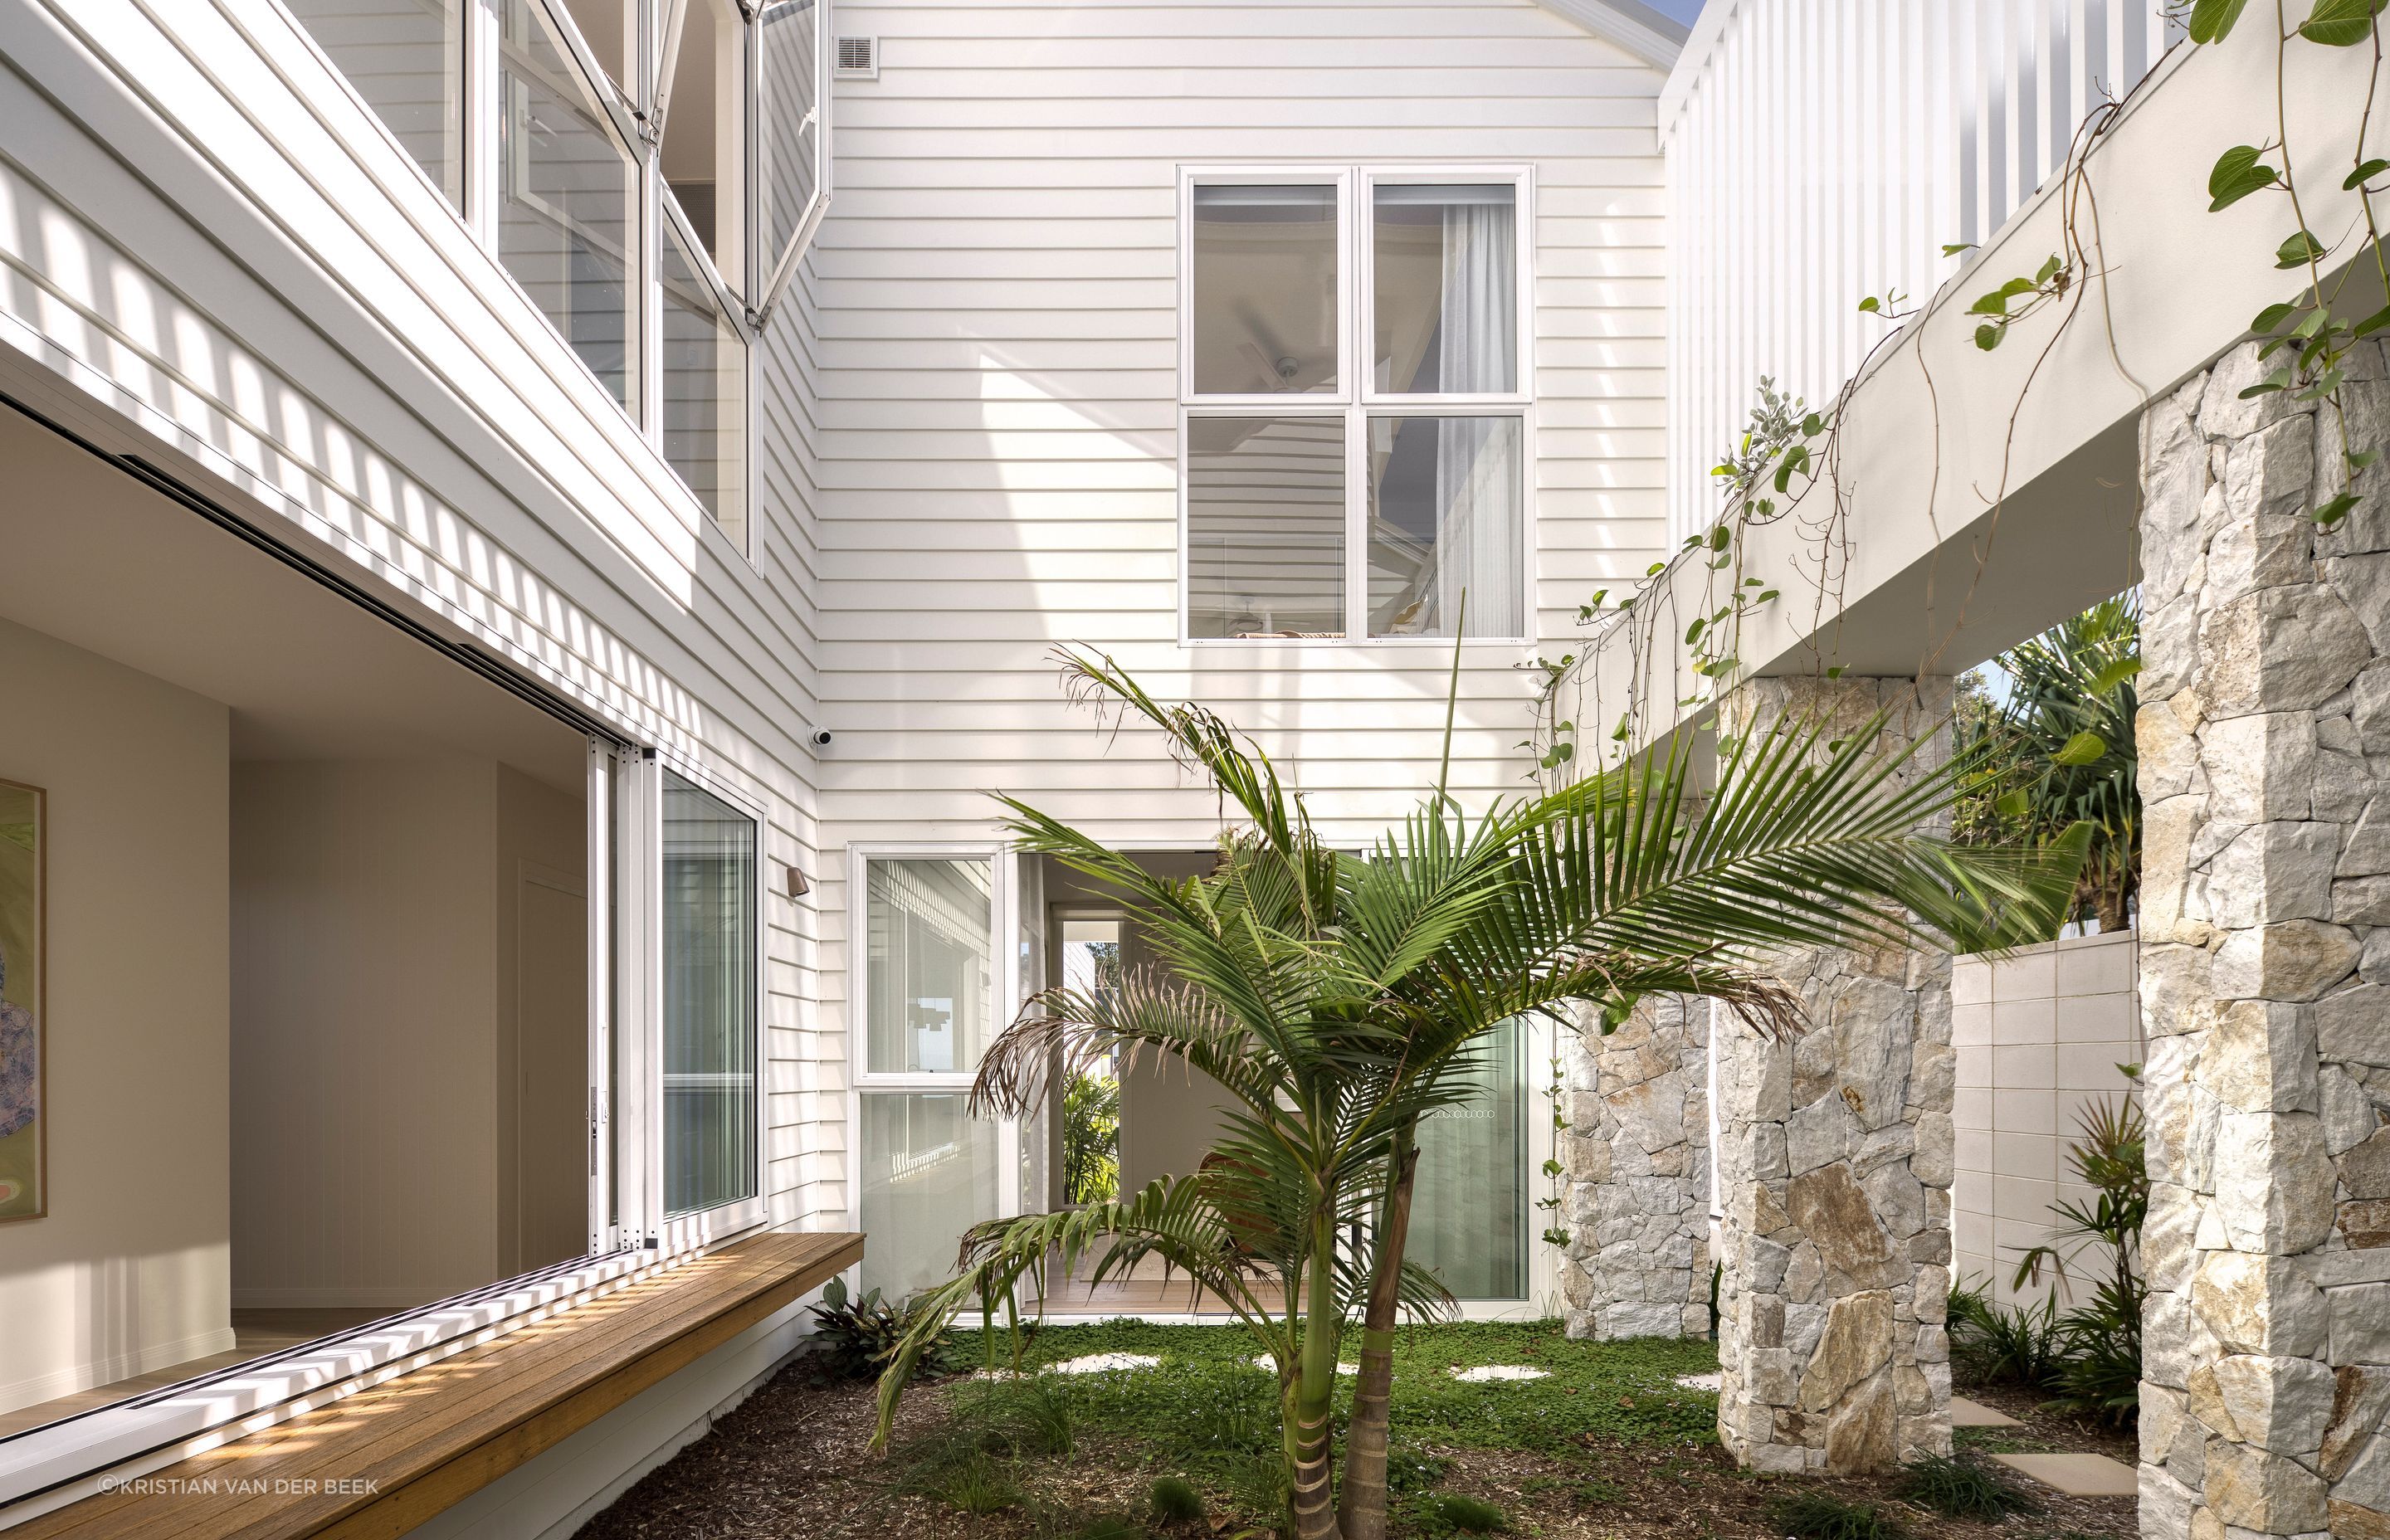 The central courtyard infuses the home with light and connects all ground floor spaces with nature | Habitat Studio Architects